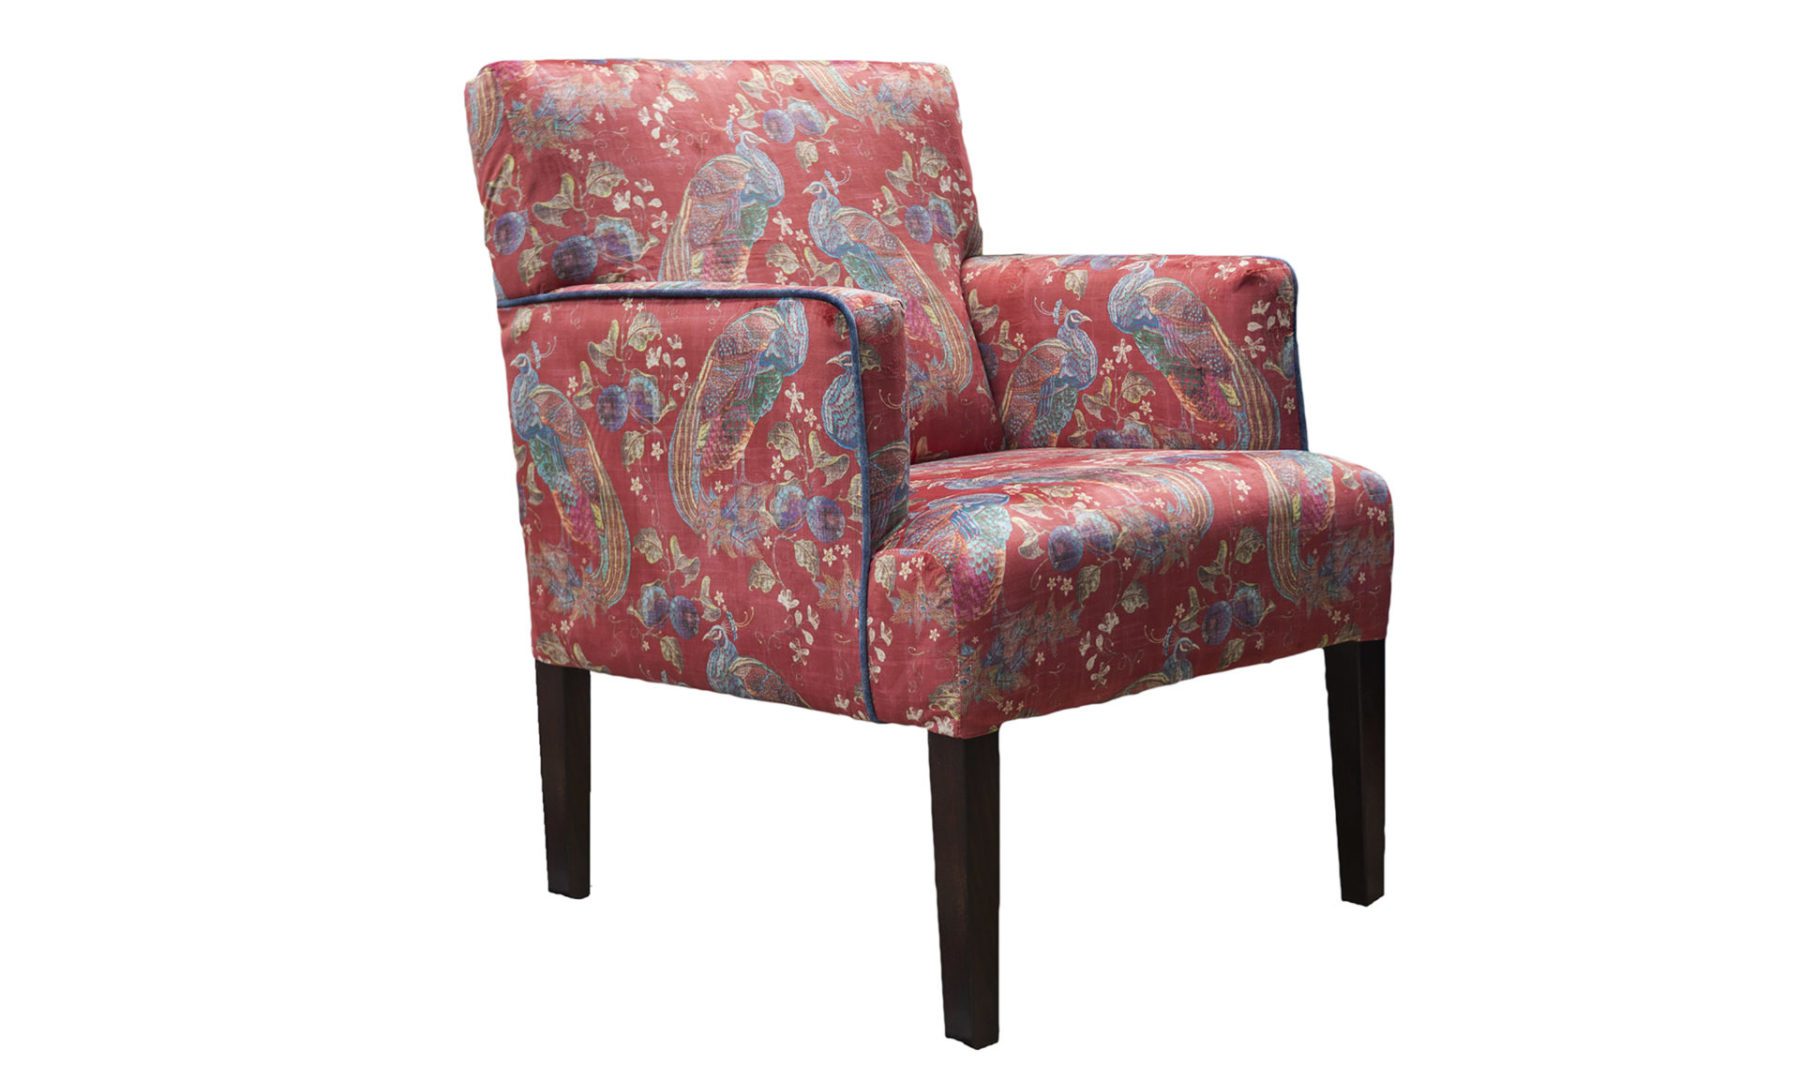 Lisa Chair in Peacock Cranberry, Platinum Collection Fabric - 405860